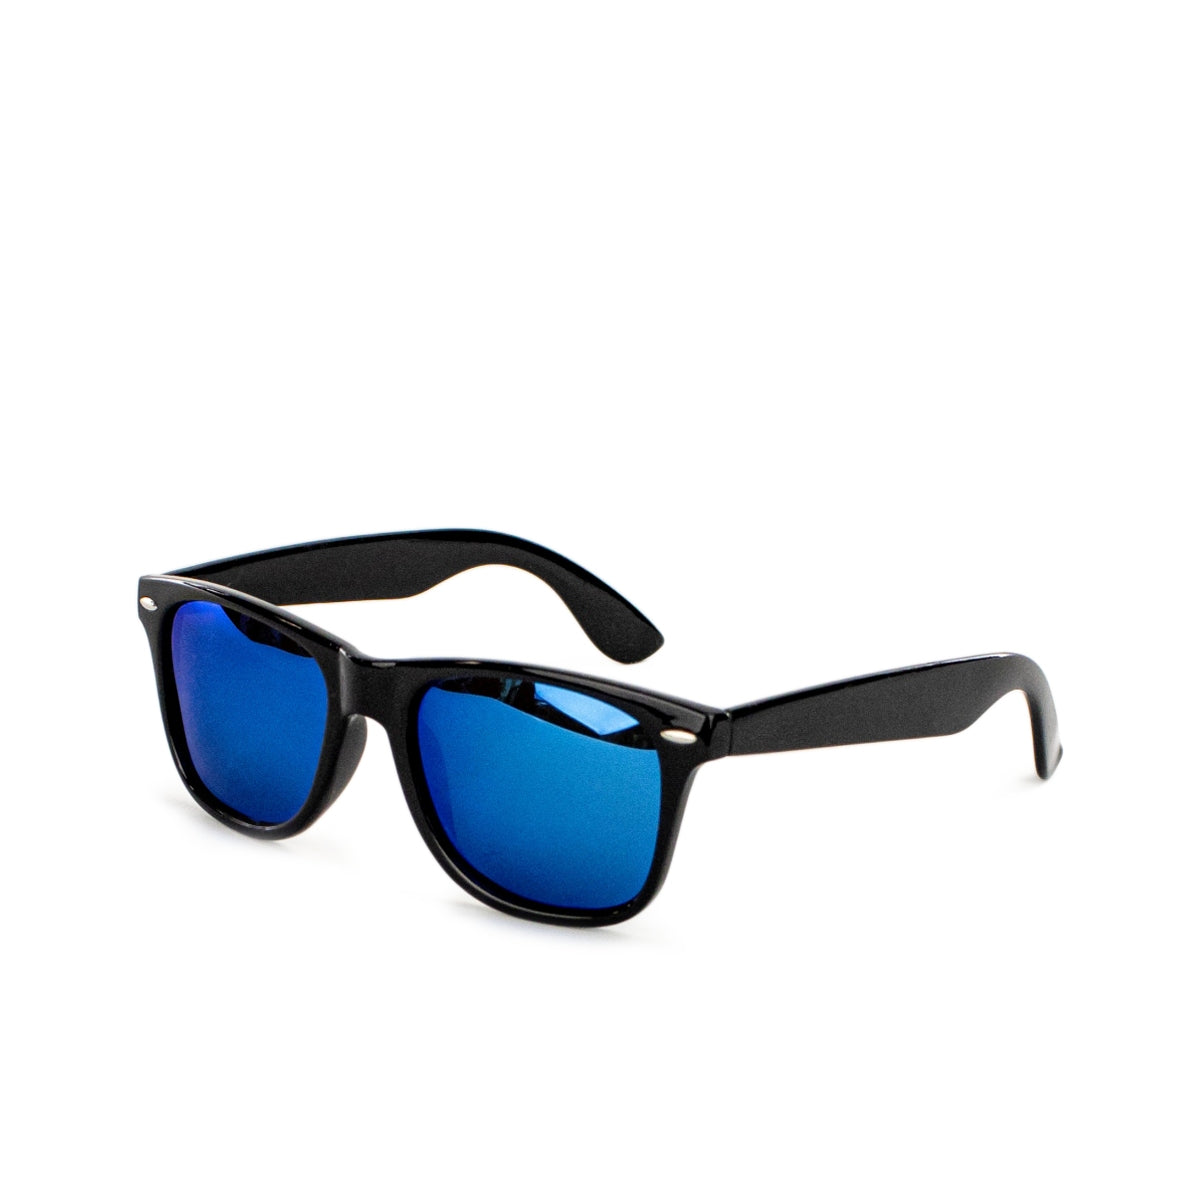 NYC Brille NYCBR002-